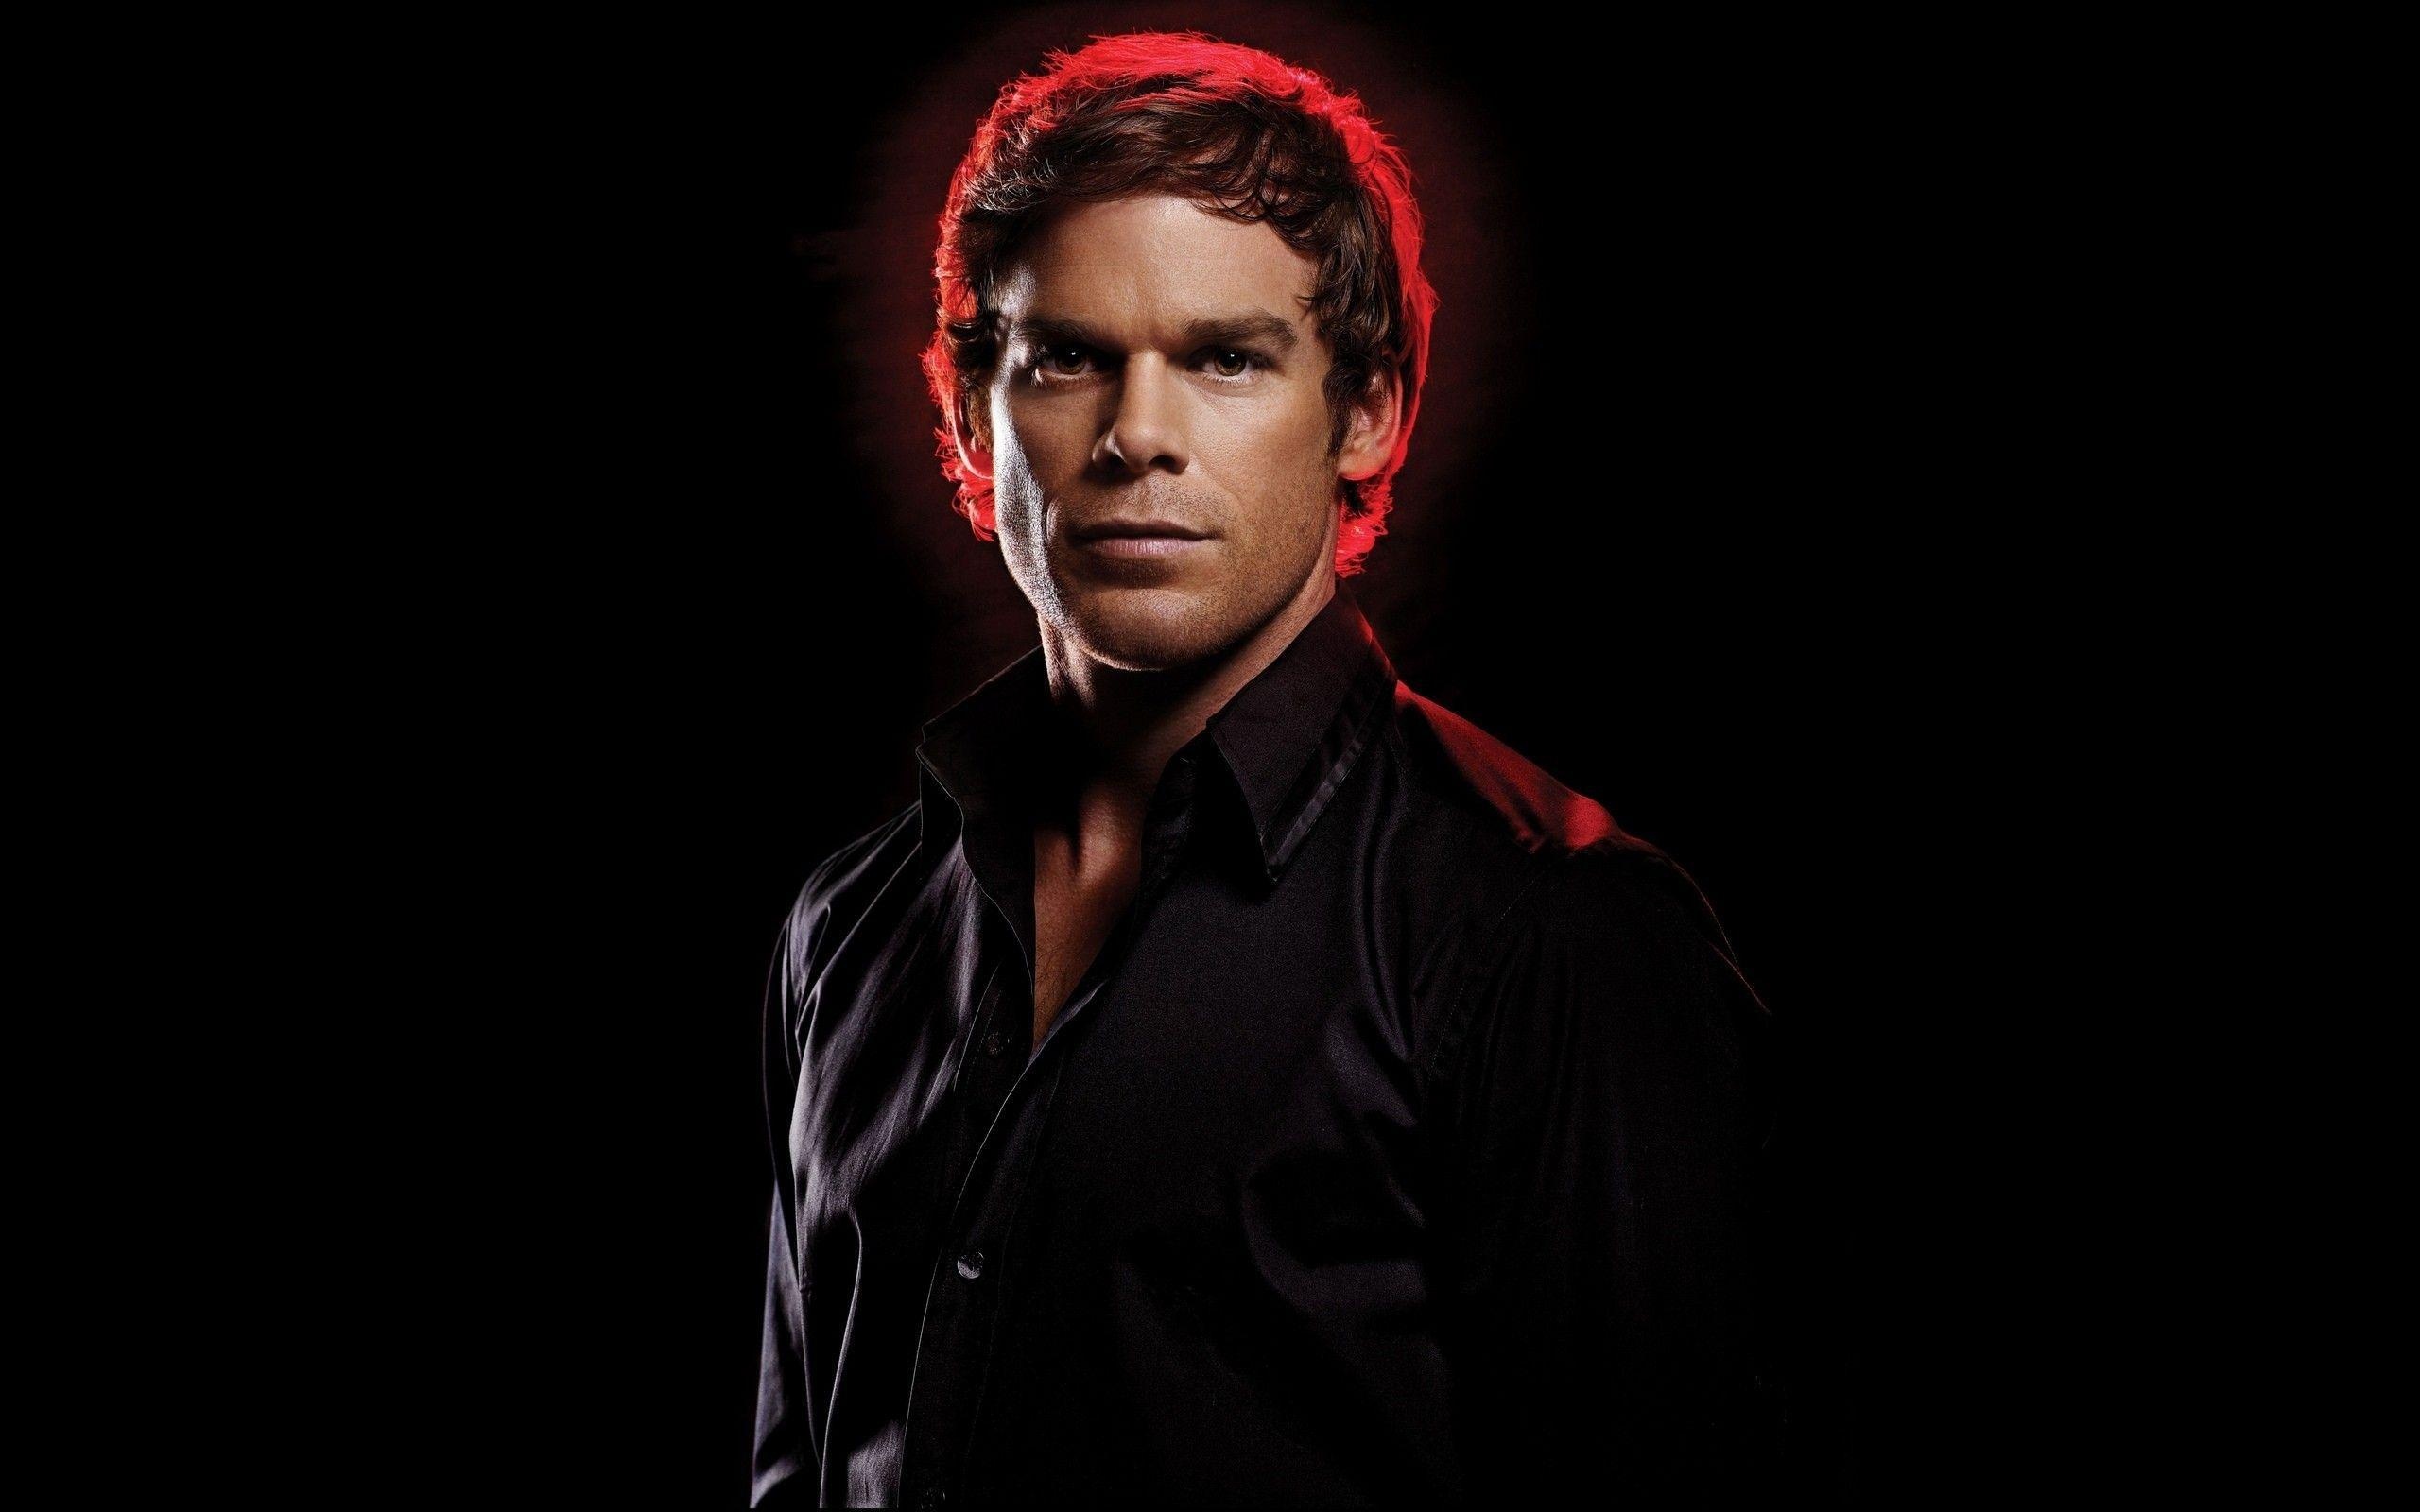 Michael C. Hall: Appeared as Ken Castle in a 2009 American science fiction action film, Gamer. 2560x1600 HD Wallpaper.